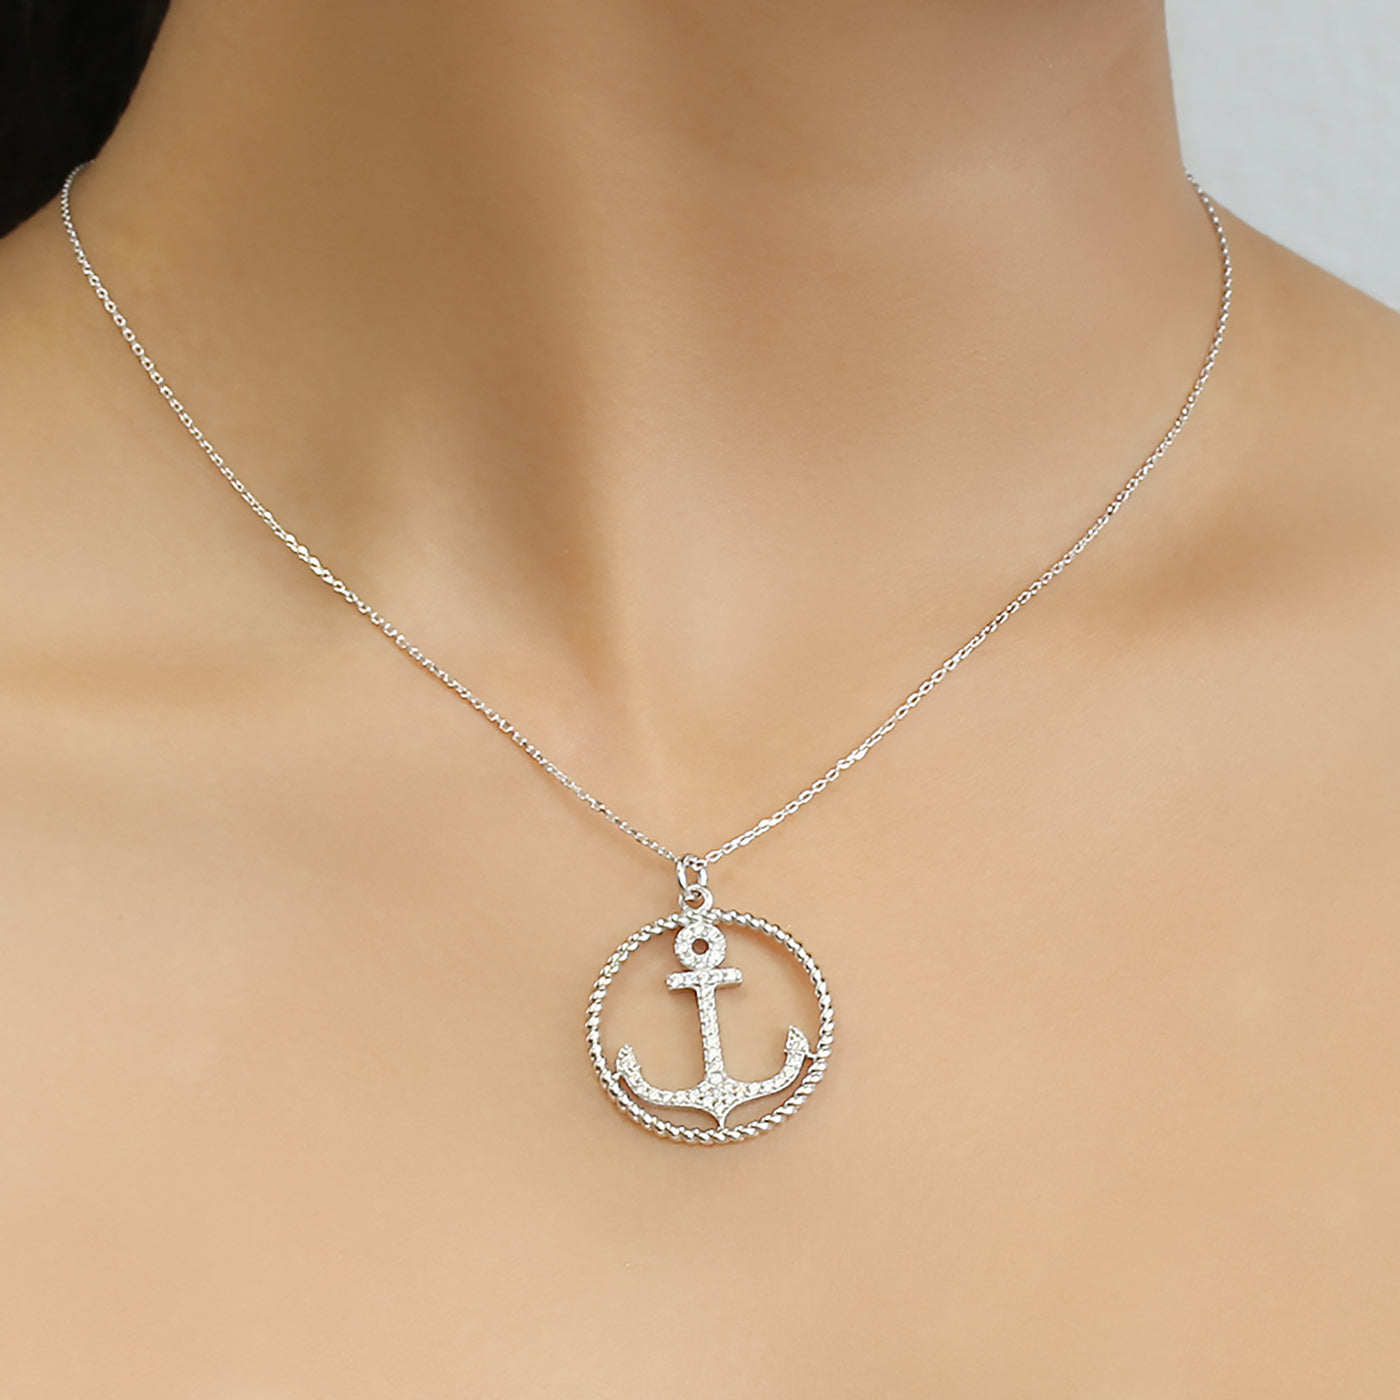 Anchor Pendant Chain Necklace, Platinum Plated Sterling Silver